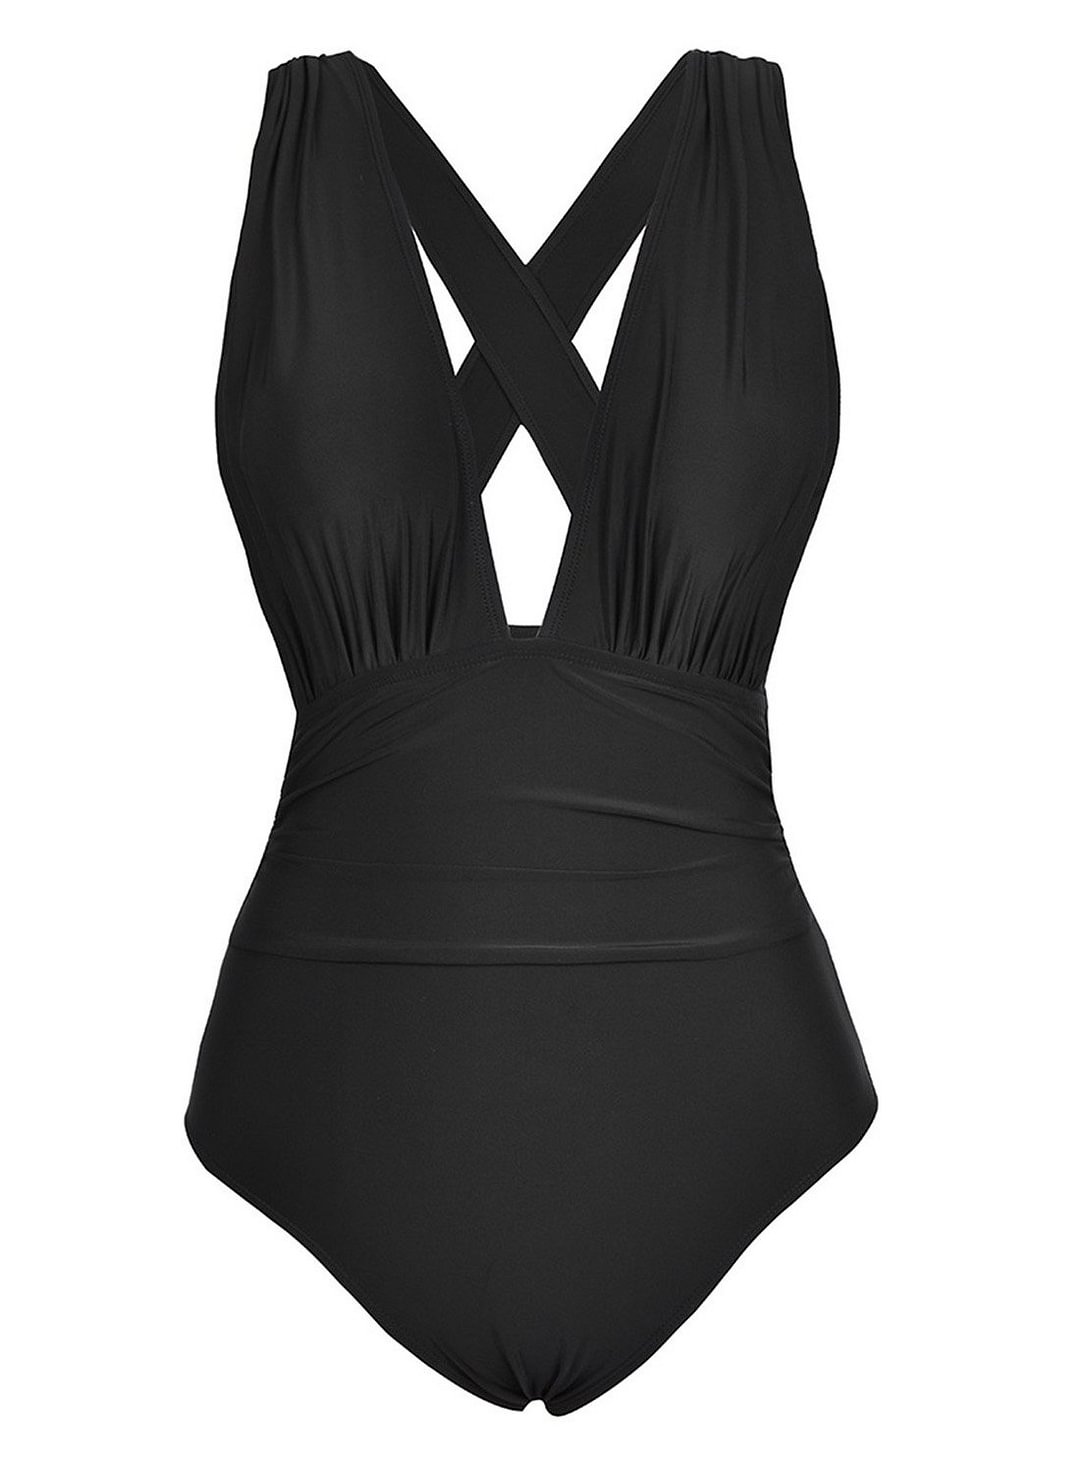 Women S High Neck Criss Cross Ruched One Piece Swimsuit Cut Out Solid Padded Monokini Bathing Suit